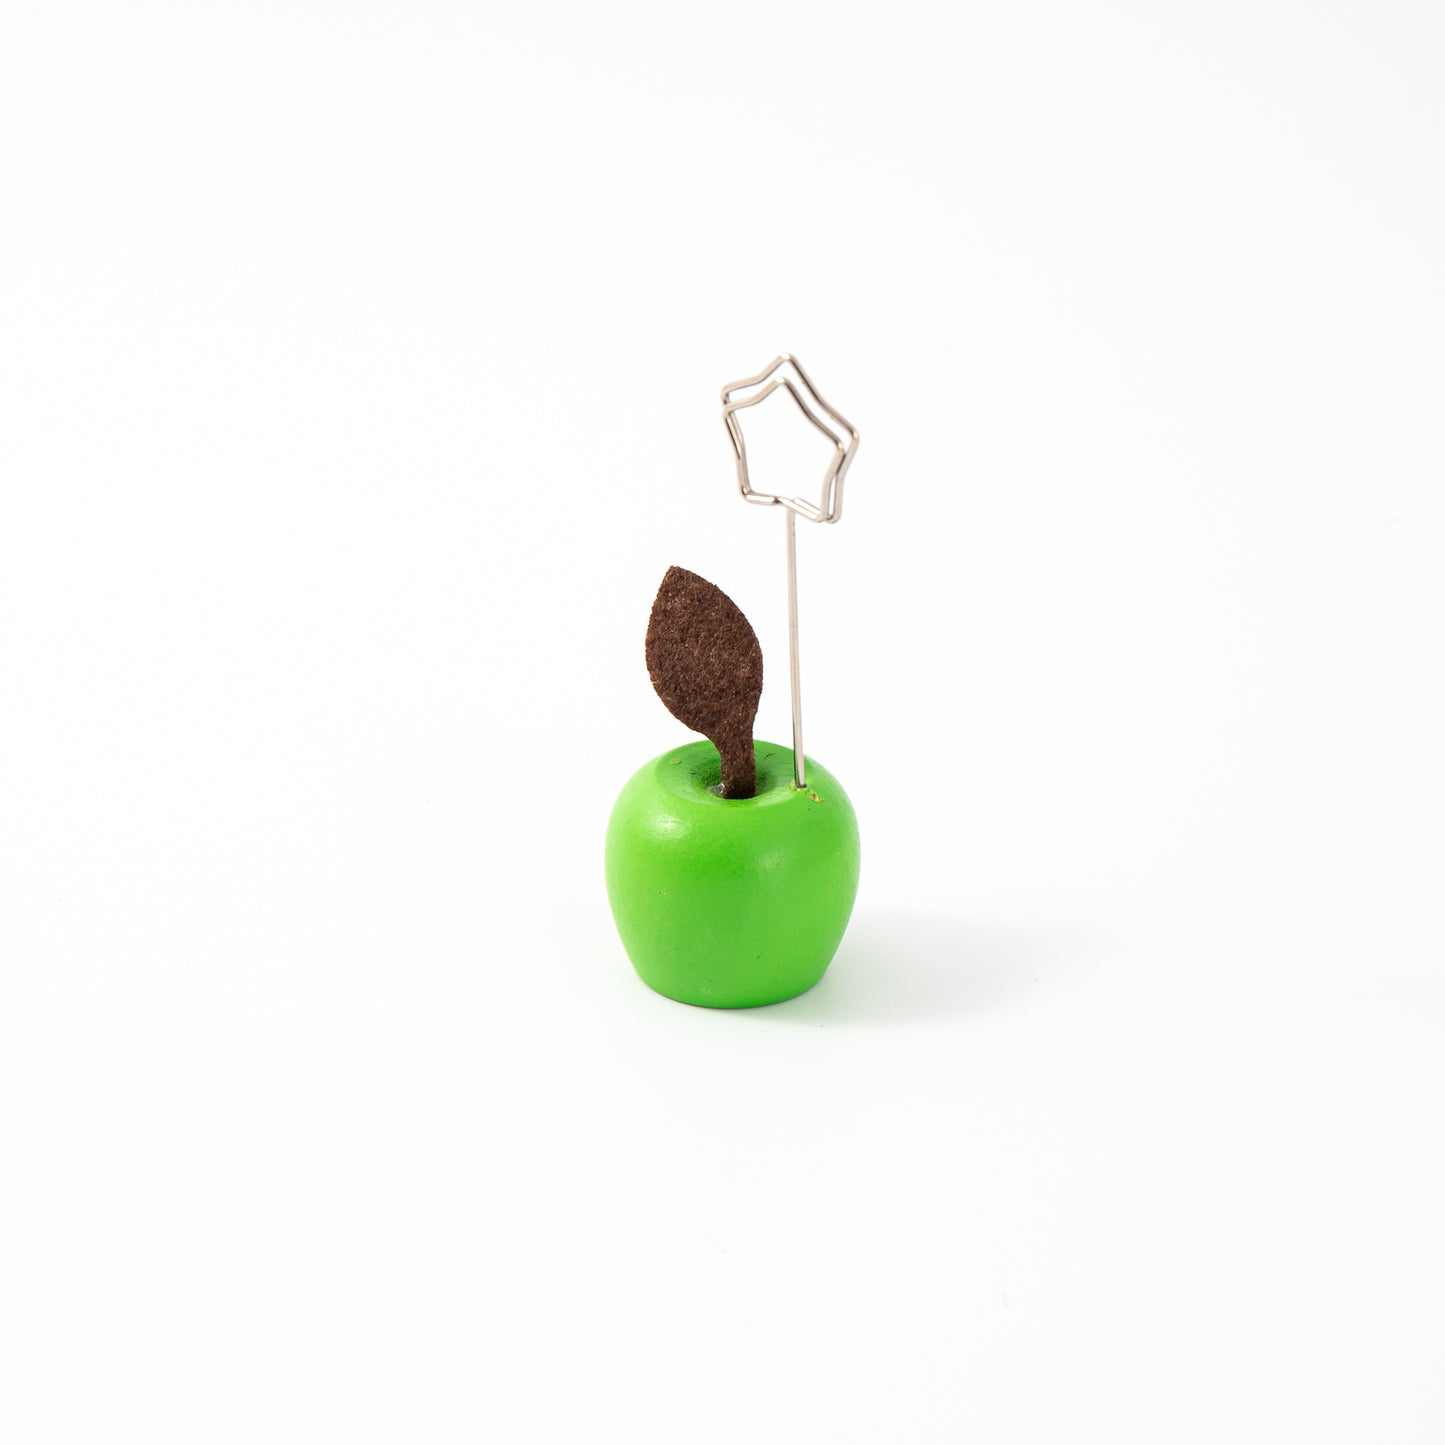 Wooden Card Note Holder - Green Apple